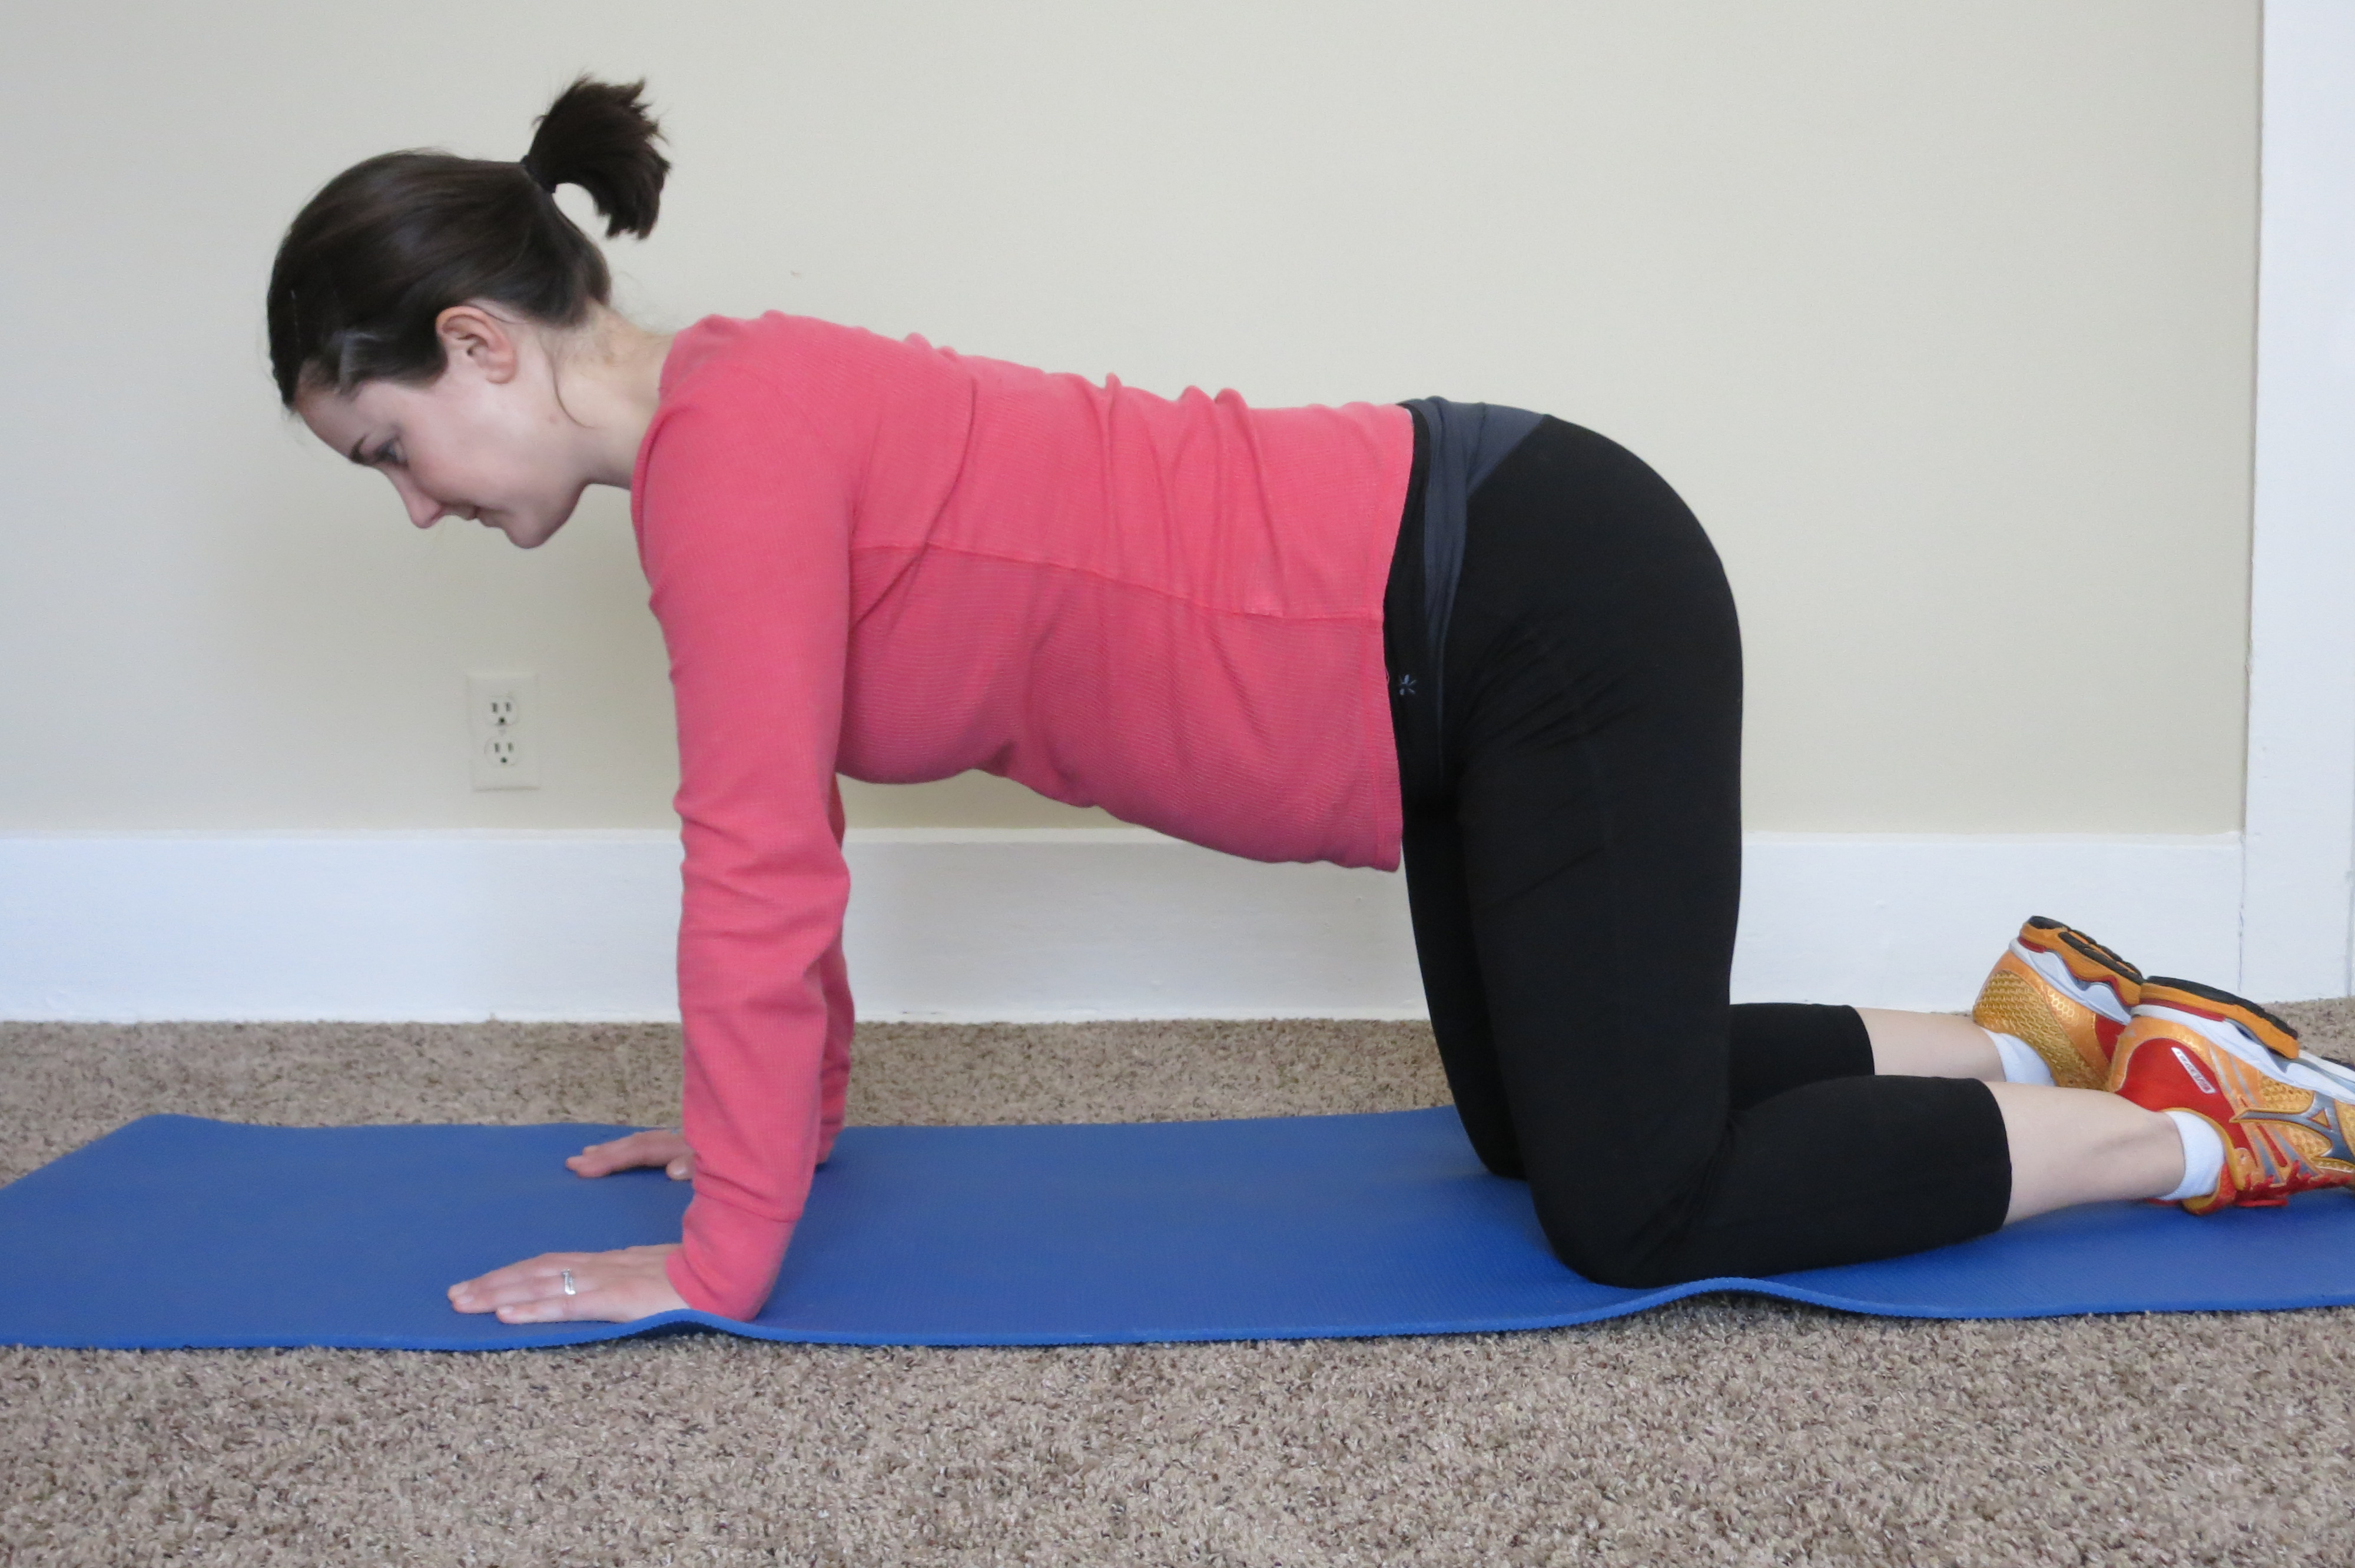 Top 3 Exercises Every Pregnant Woman Should Do - kaylee may